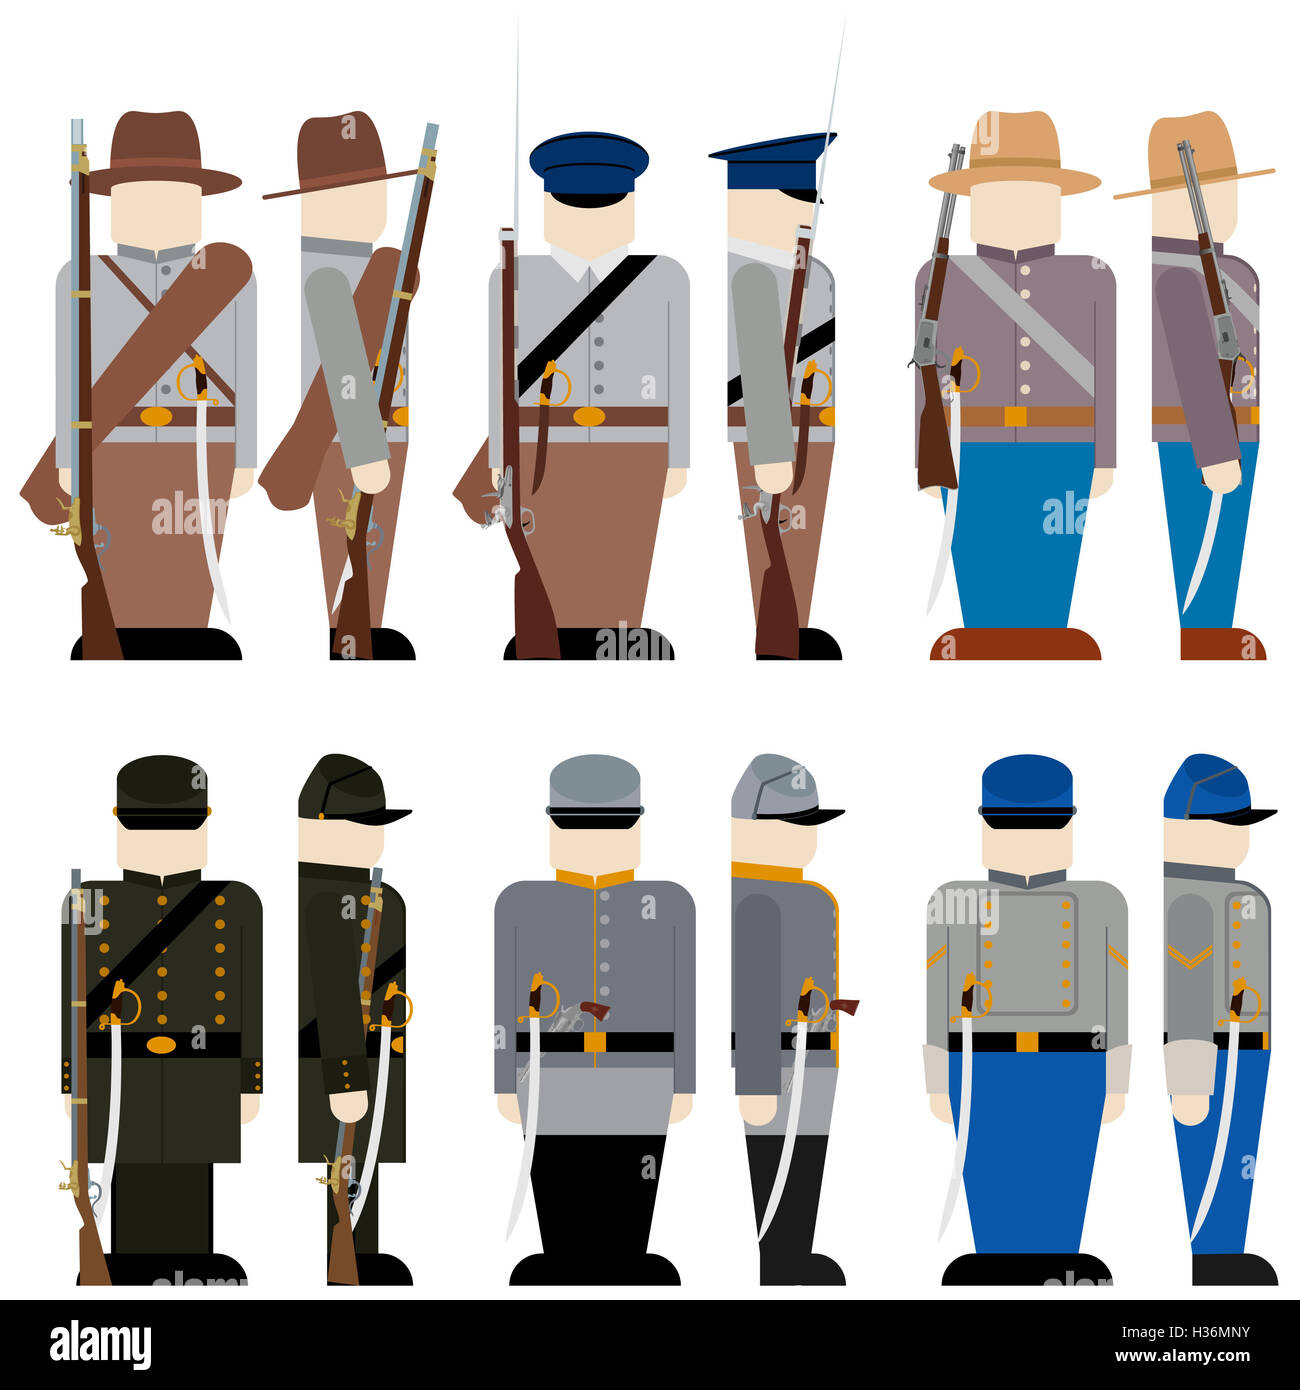 The Armed Forces of the Confederate army in the Civil War the United States. The illustration on a white background. Stock Photo